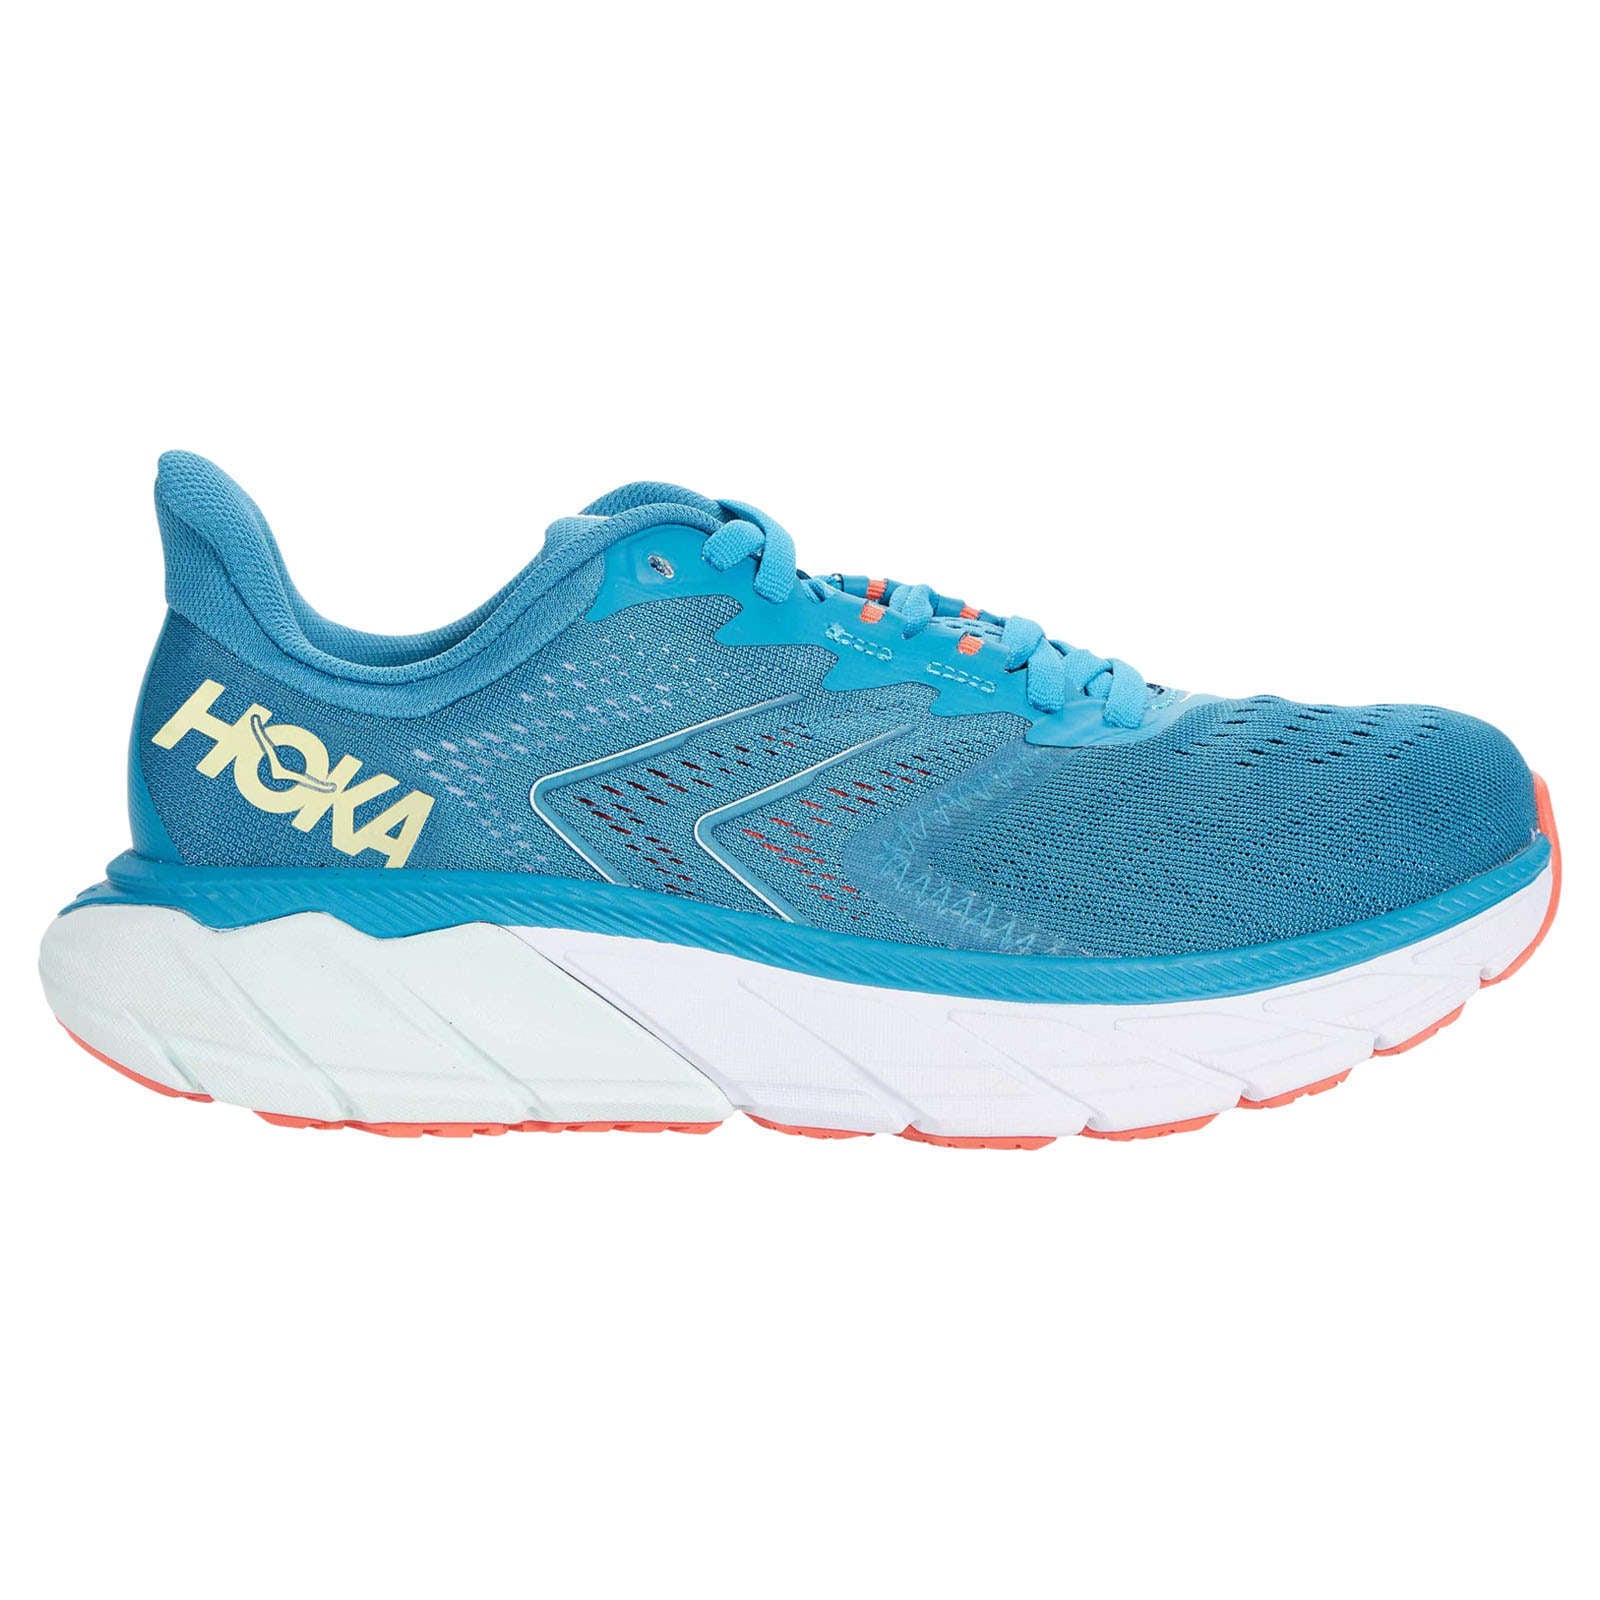 Hoka One One Arahi 5 Synthetic Textile Women's Low-Top Road Running Trainers#color_mosaic blue luminary green